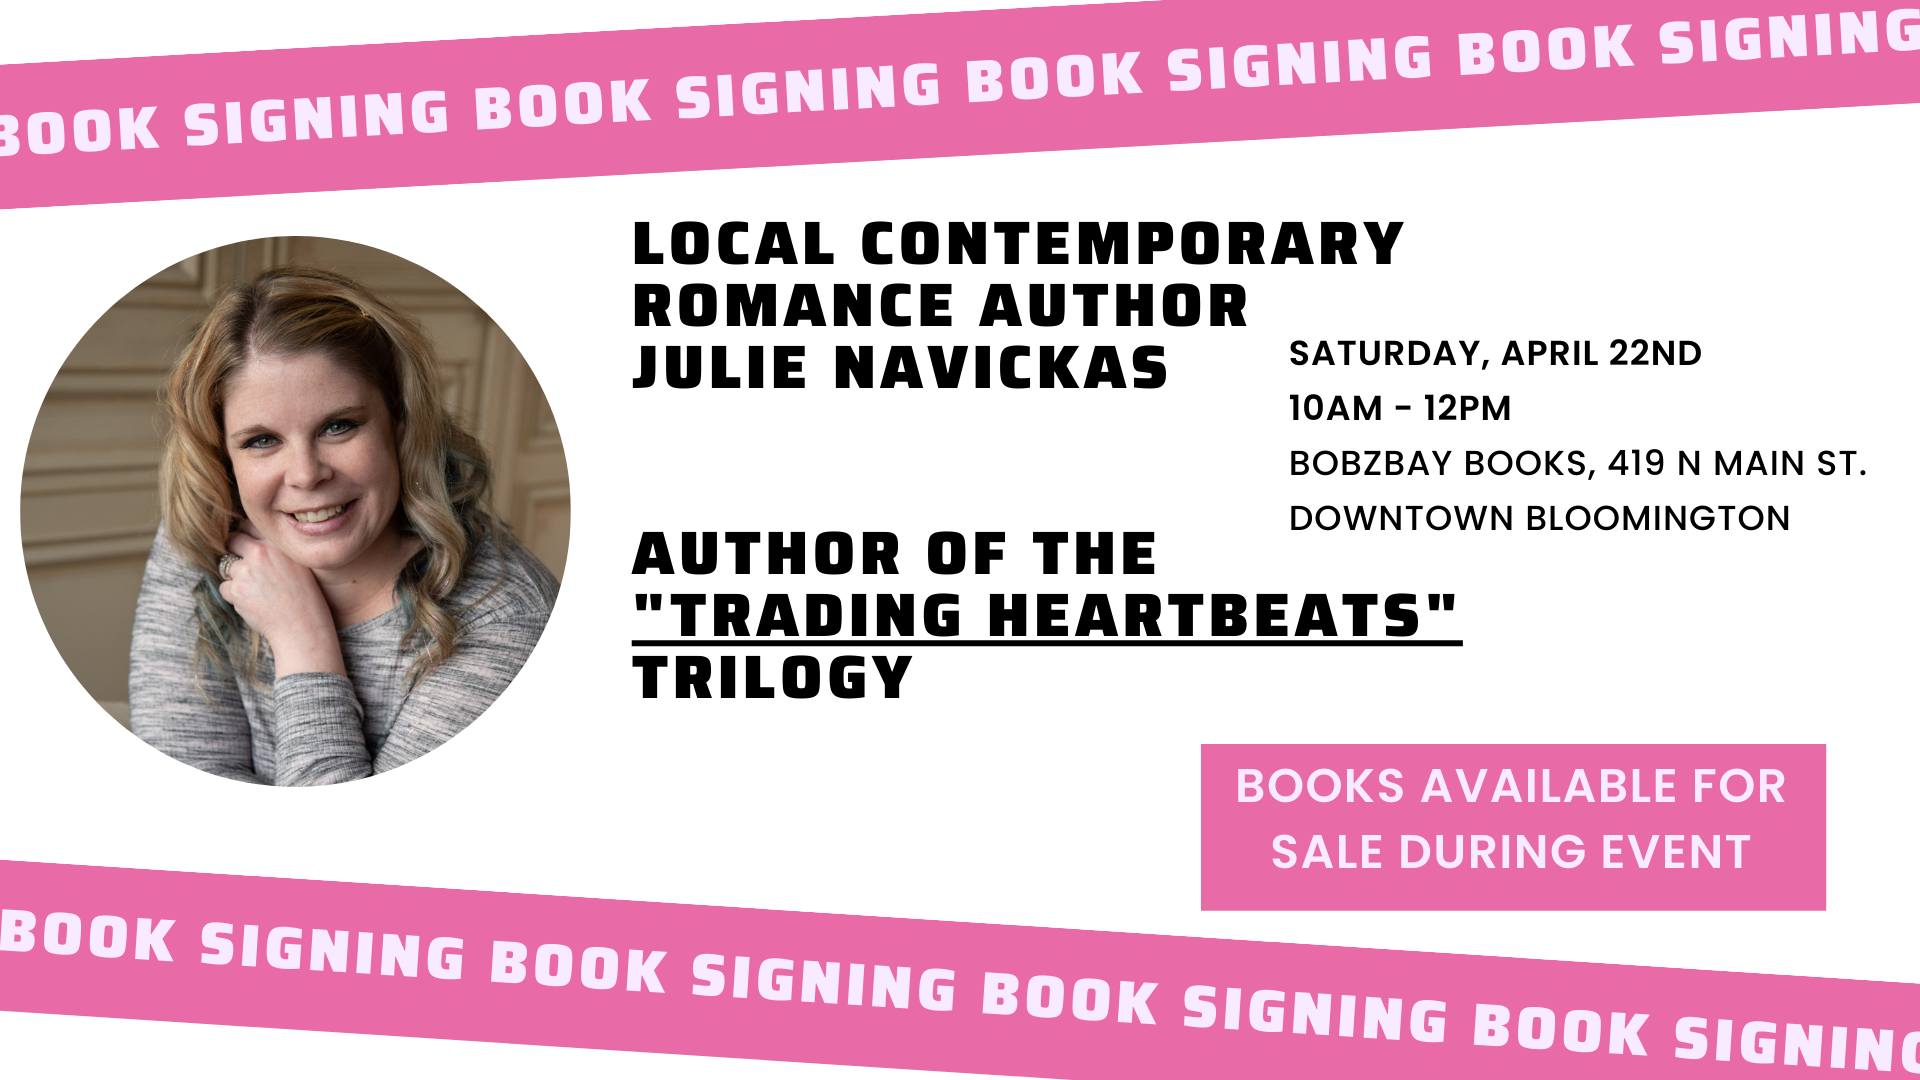 Local Contemporary Romance Author Julie Navickas Book Signing at Bobzbay Books